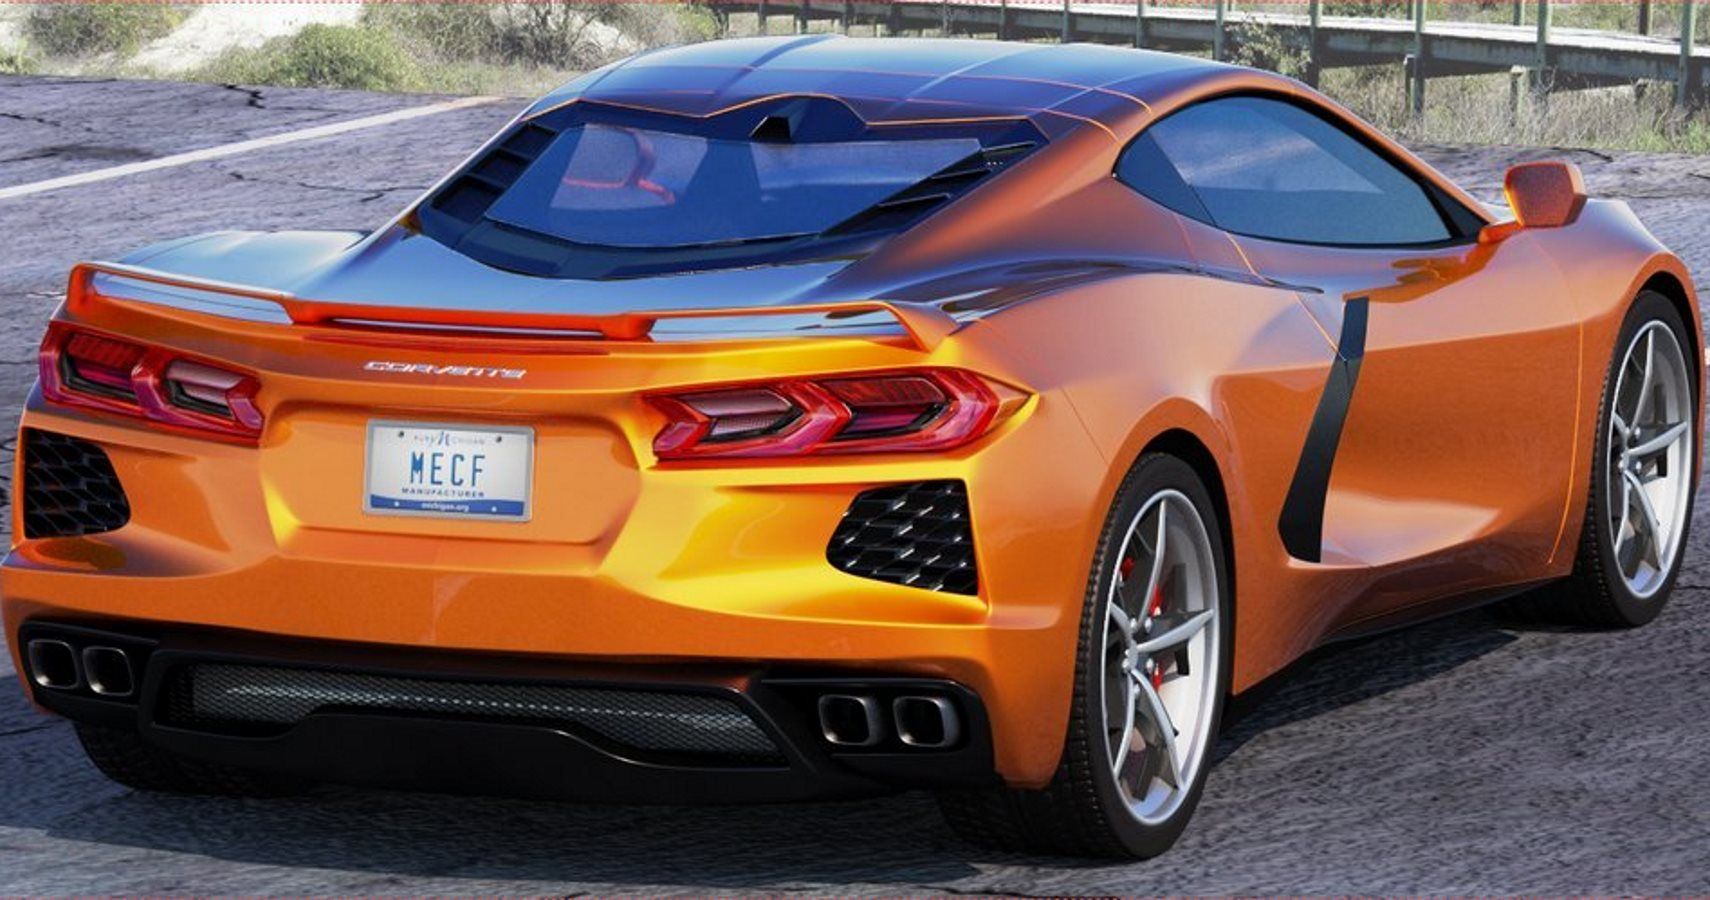 New Renders May Be The Closest We've Come To A Bare Mid-Engine Corvette